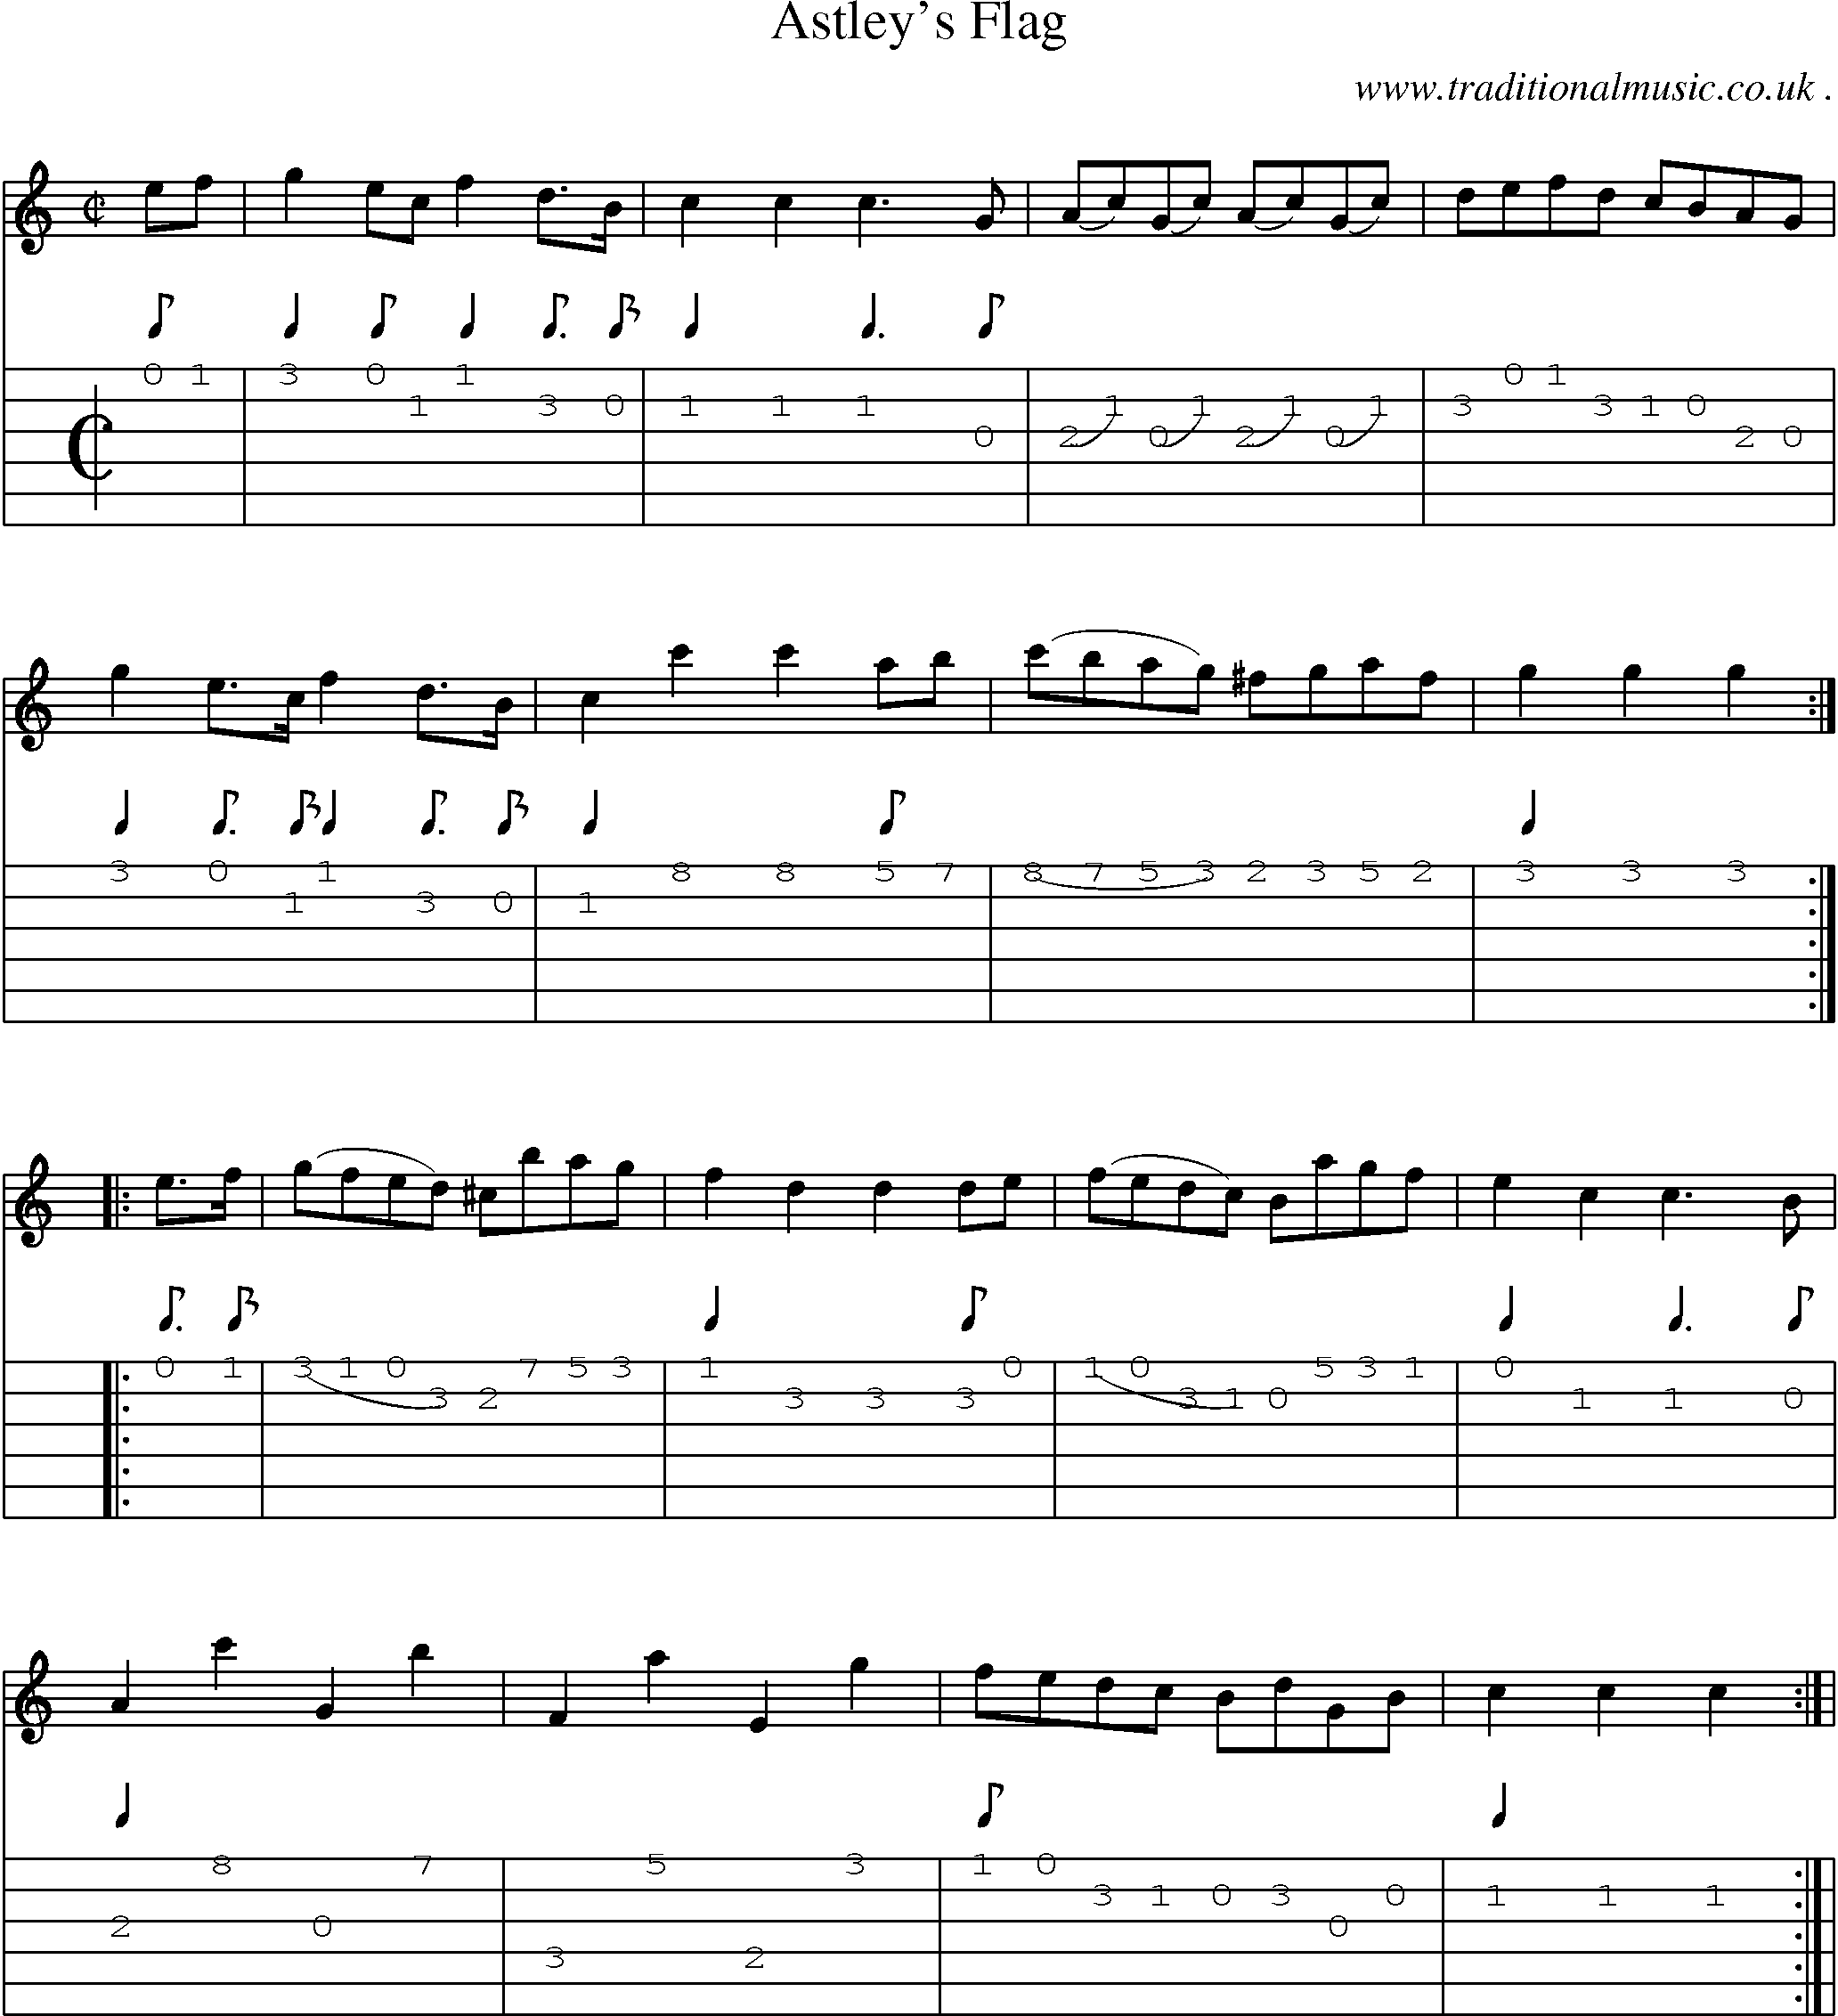 Sheet-Music and Guitar Tabs for Astleys Flag